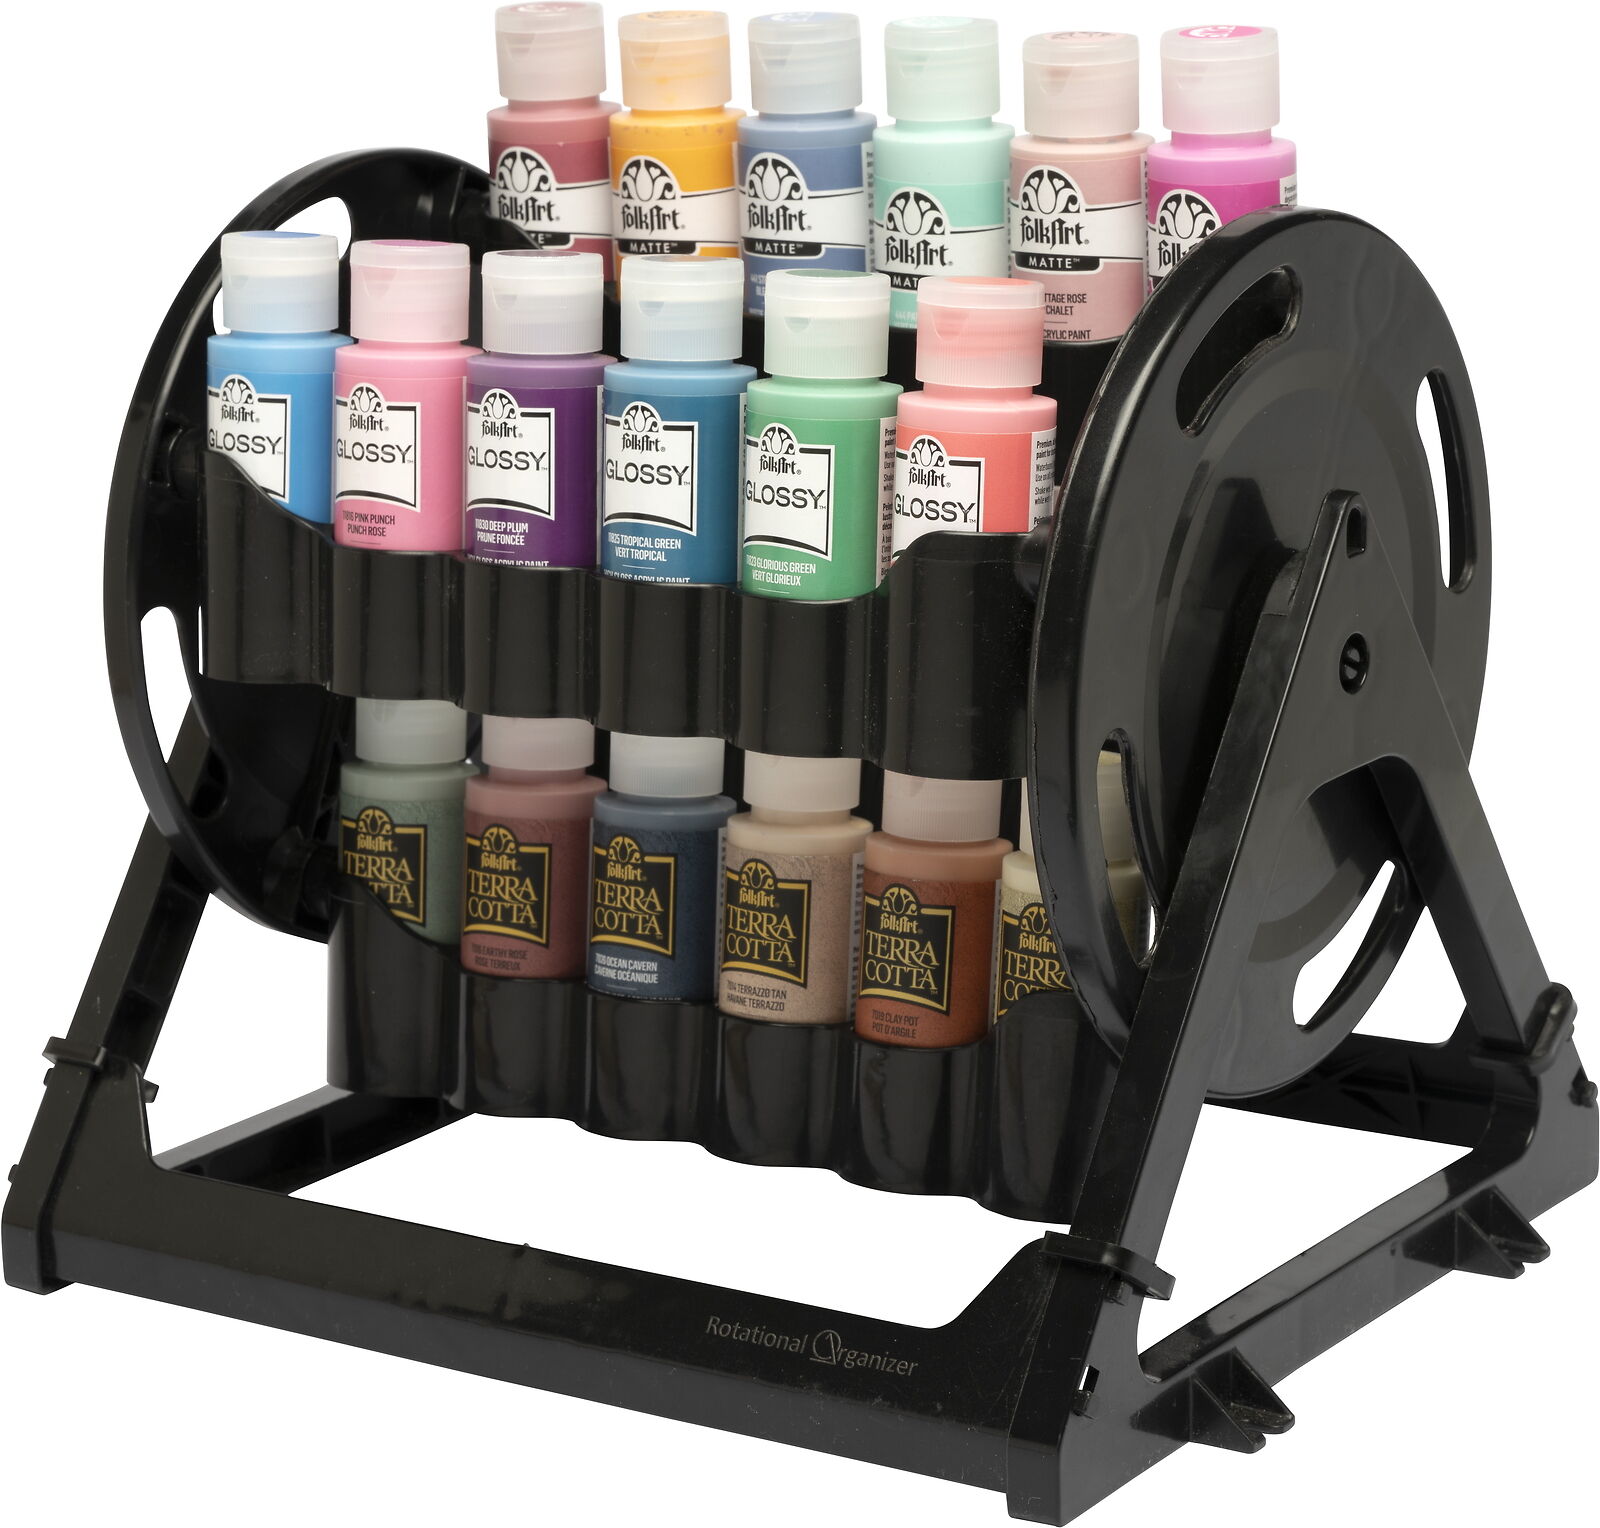 Arts and Crafts 2 oz Paint Bottle Rotational Organizer